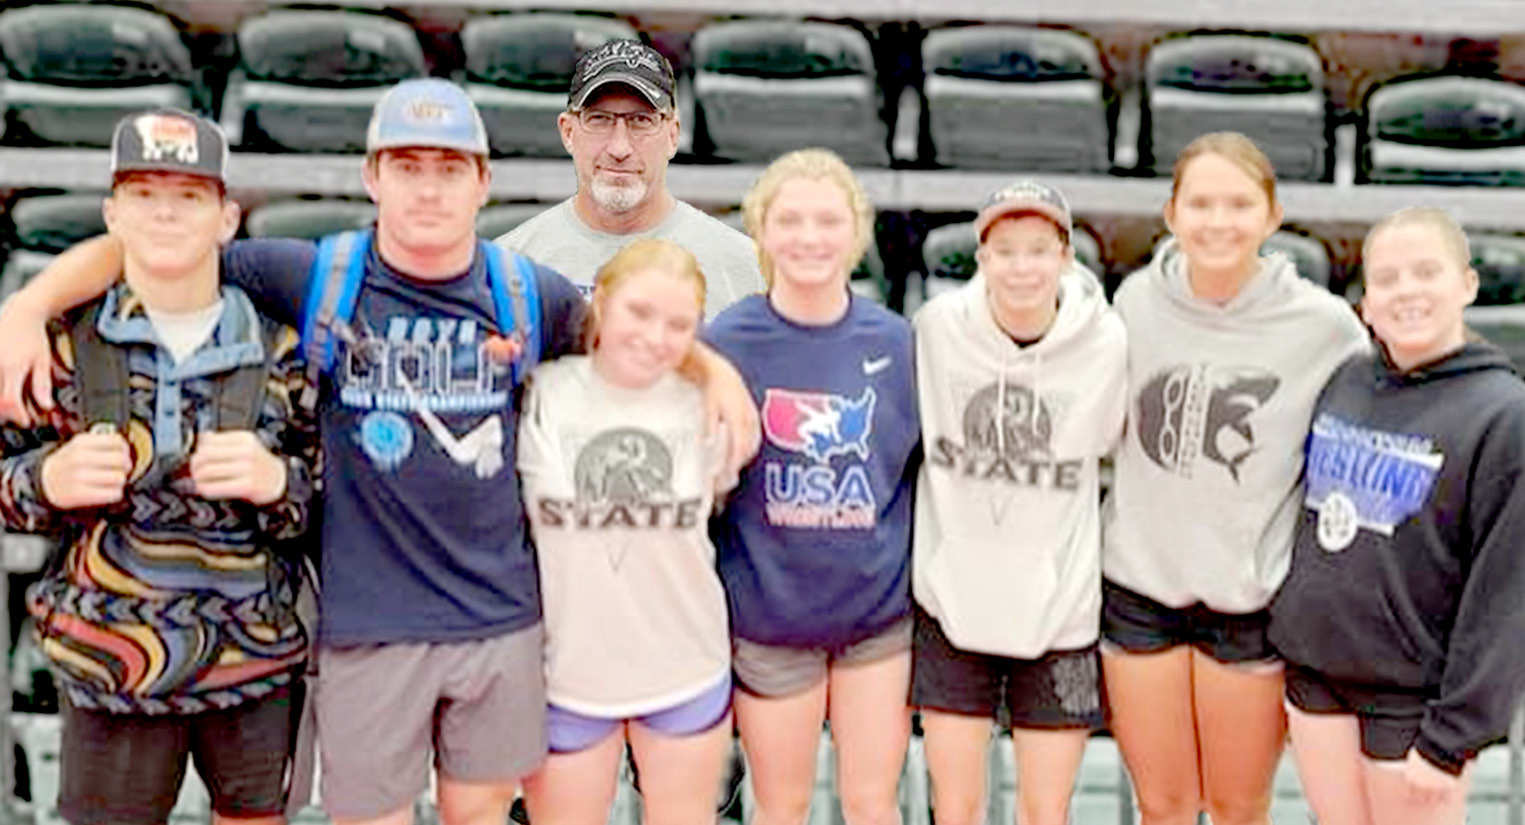 Tiger Wrestlers attending UNK’s camp were, from left: Calder Elmer, Emerson Lowry, Coach Clint Bedore, Aiyden Kerr, Ashlyn Hahn, Carolina Northup, Shae Yohon and Mia Odle.